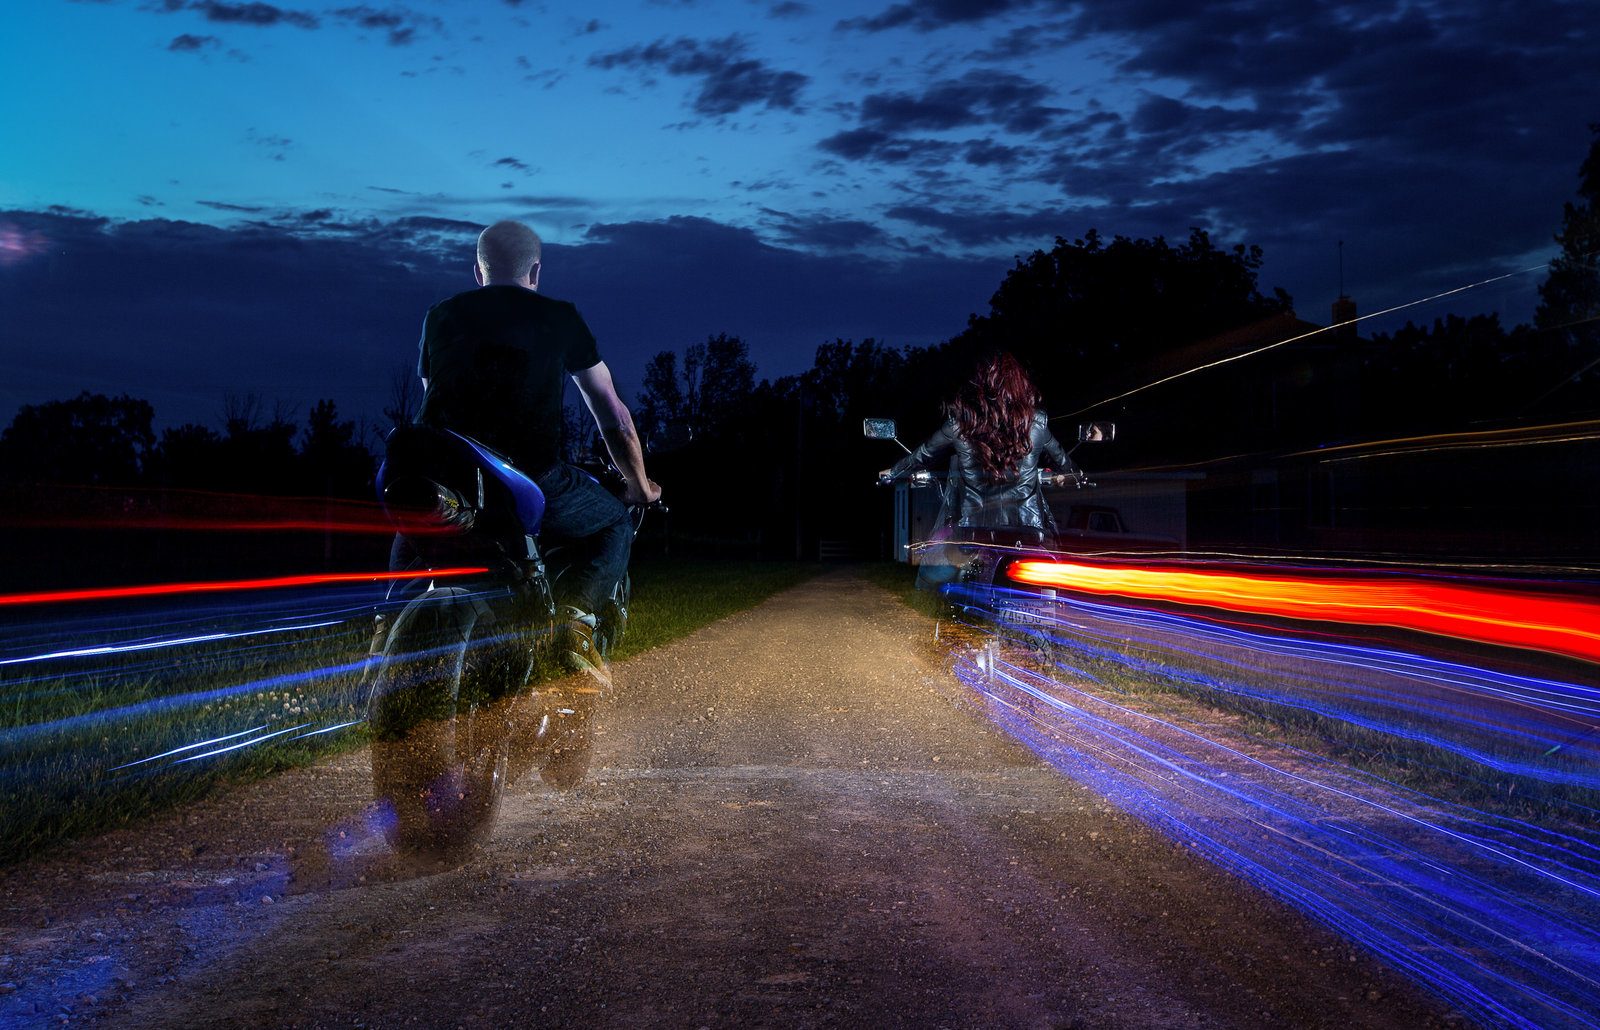 Rich Paprocki Photography Engagement shoot with motorcycles